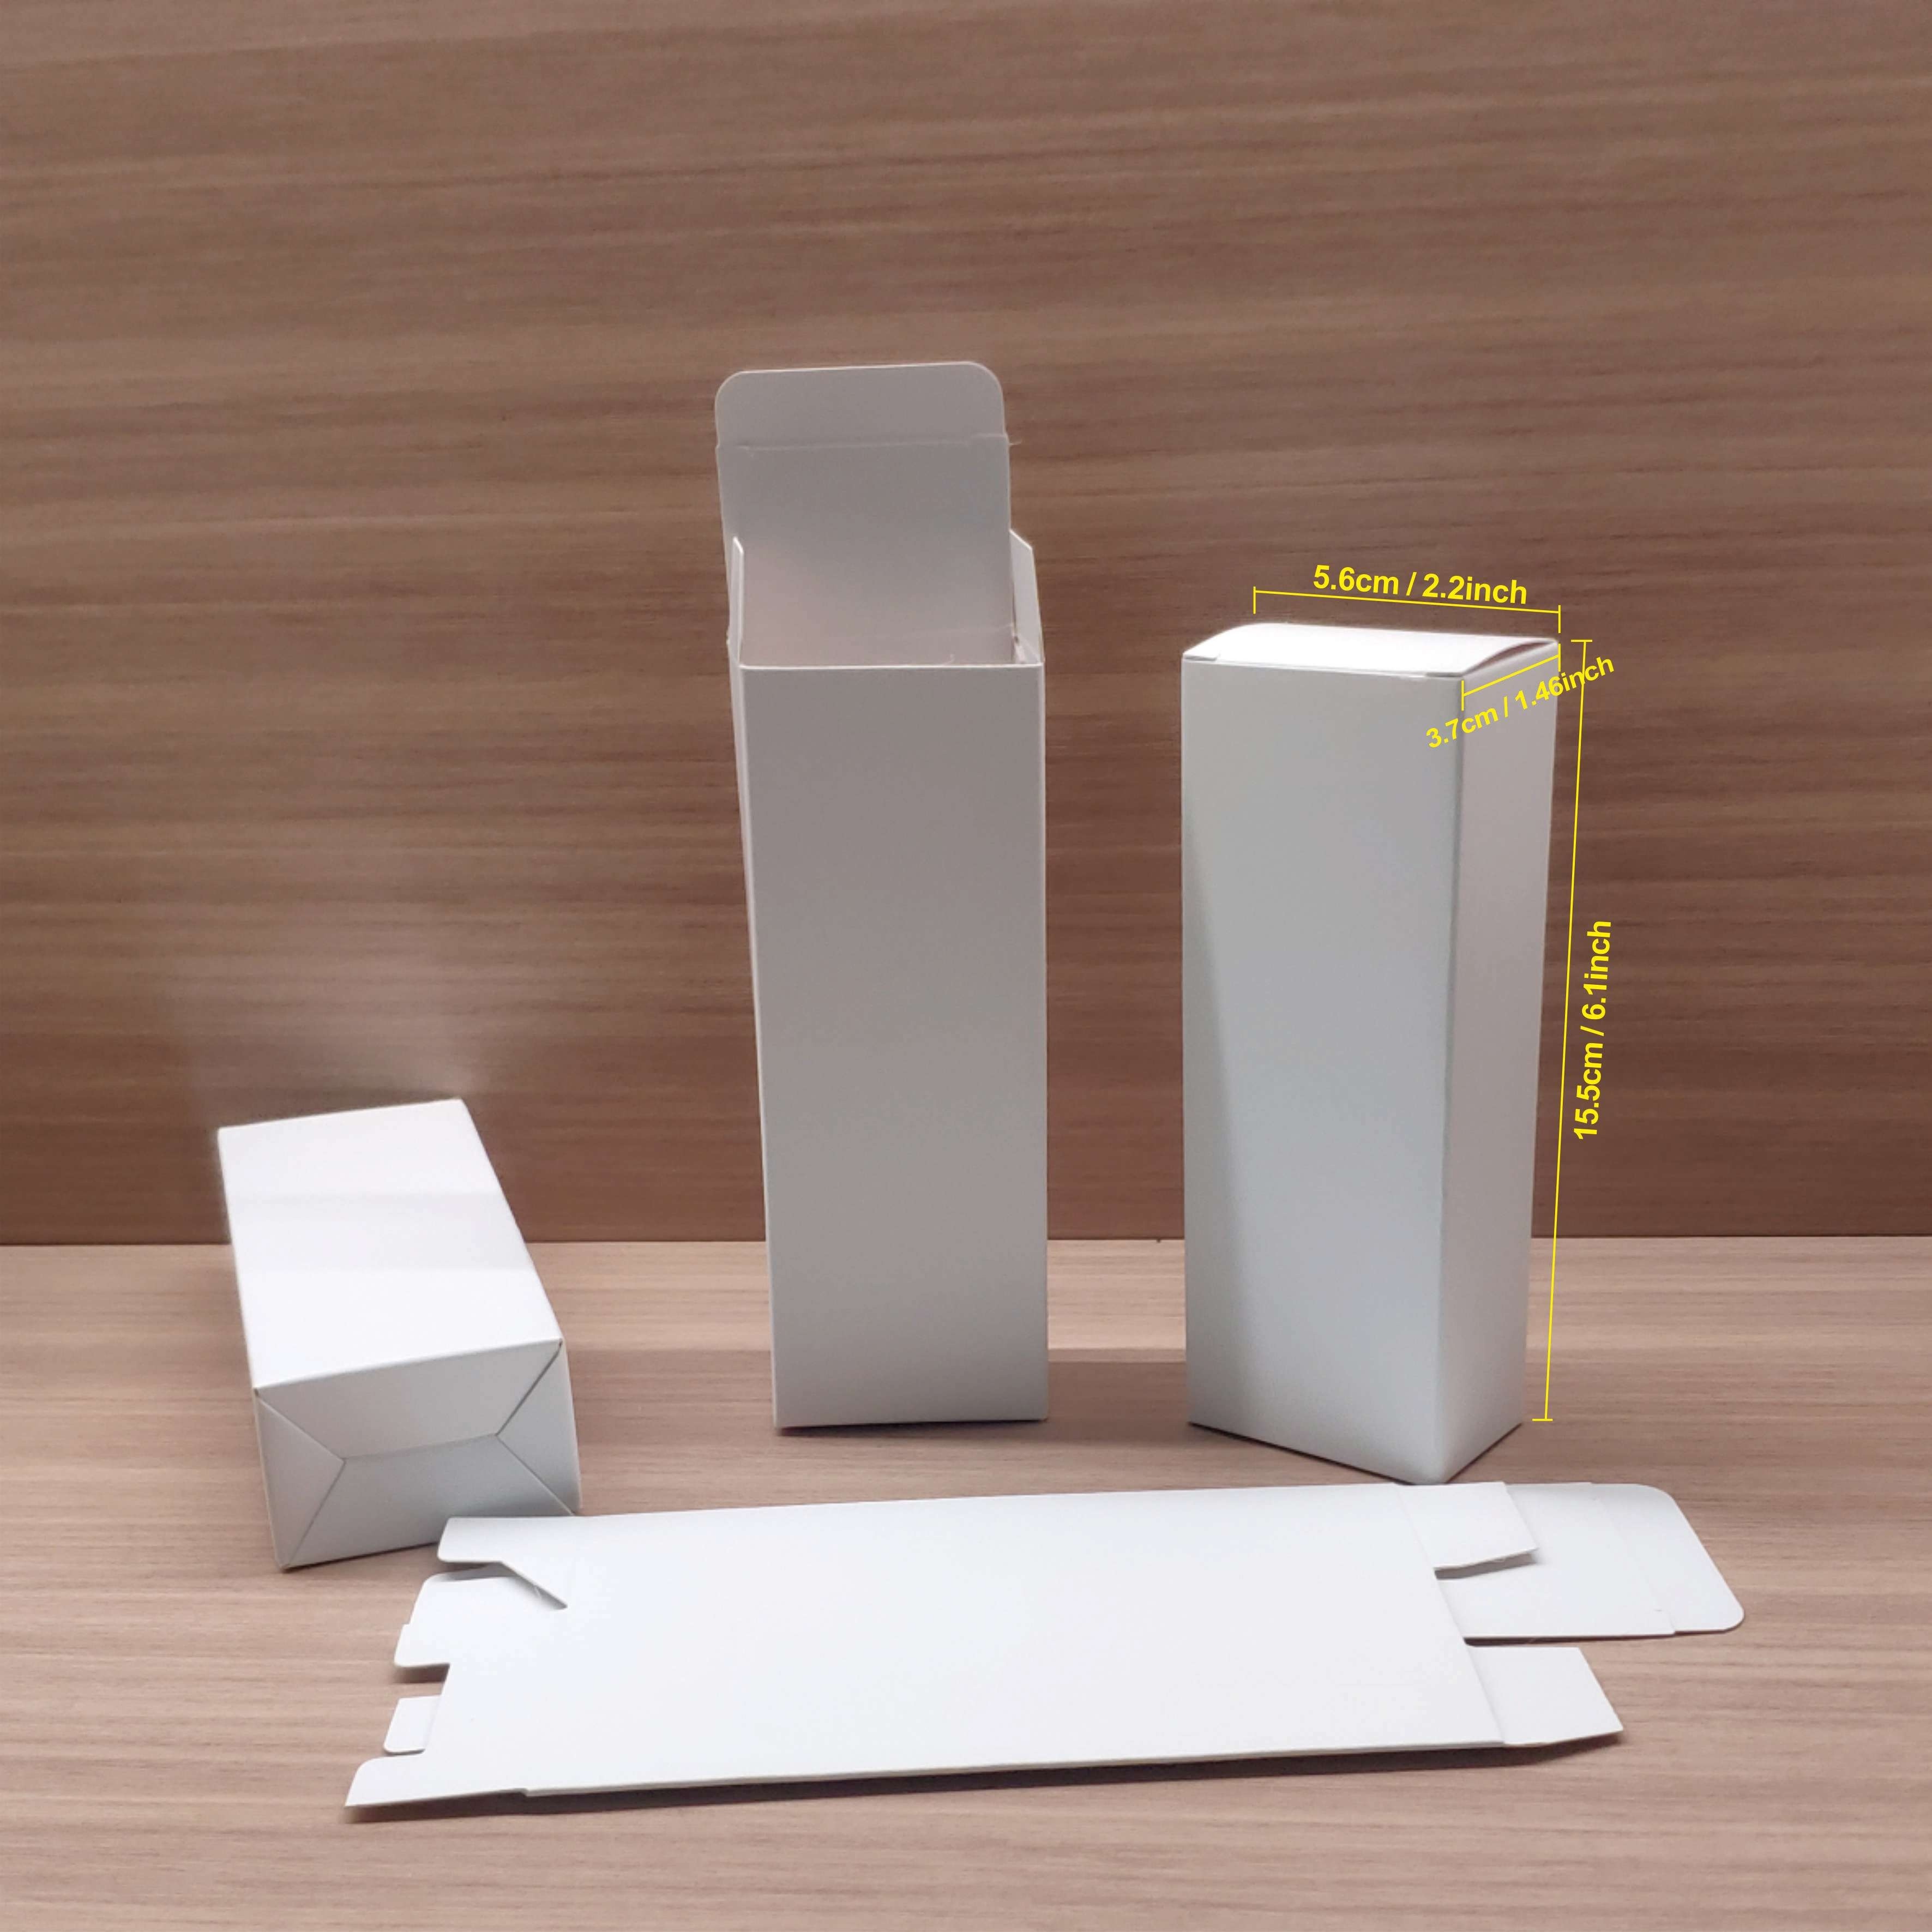 

20pcs, 2.2x1.46x6.1inch Foldable Cardboard Gift Box, White Rectangular Box, Gift Holiday Party Box, Universal Packaging Box, Used For Commercial Packaging Craft Gifts, Paper Products